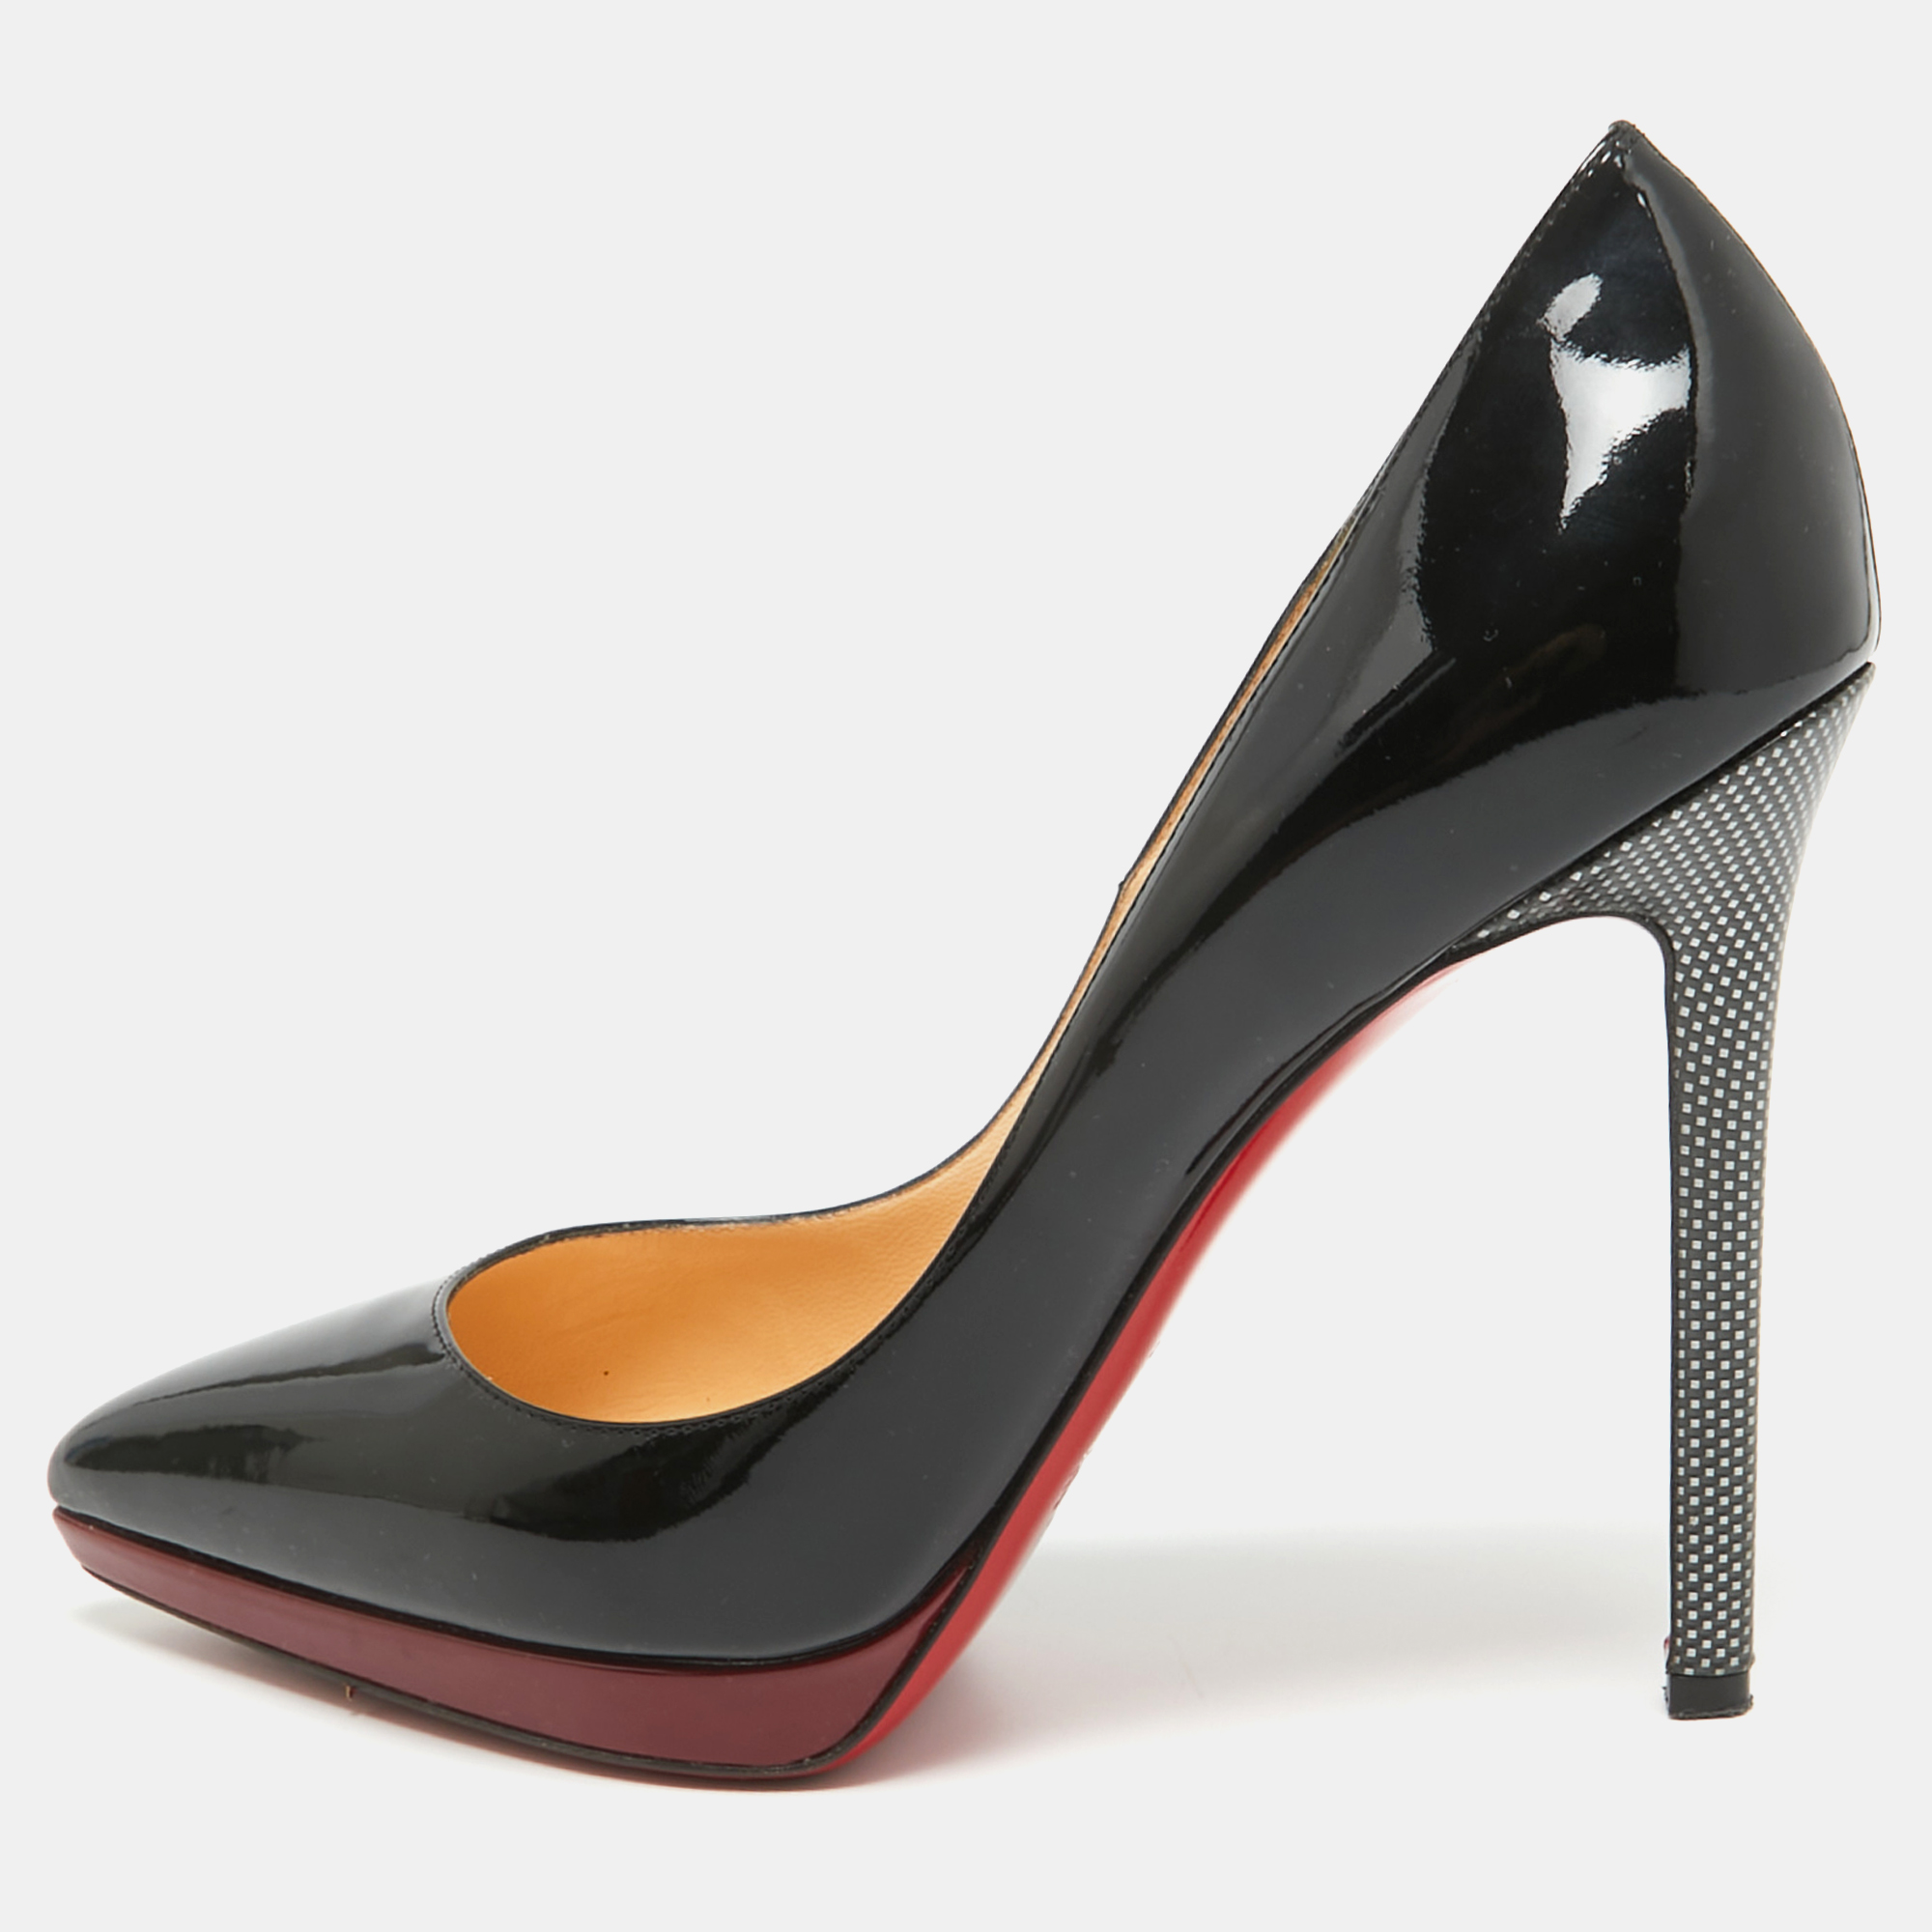 Pre-owned Christian Louboutin Black Patent Leather Pigalle Plato Pumps Size 38.5